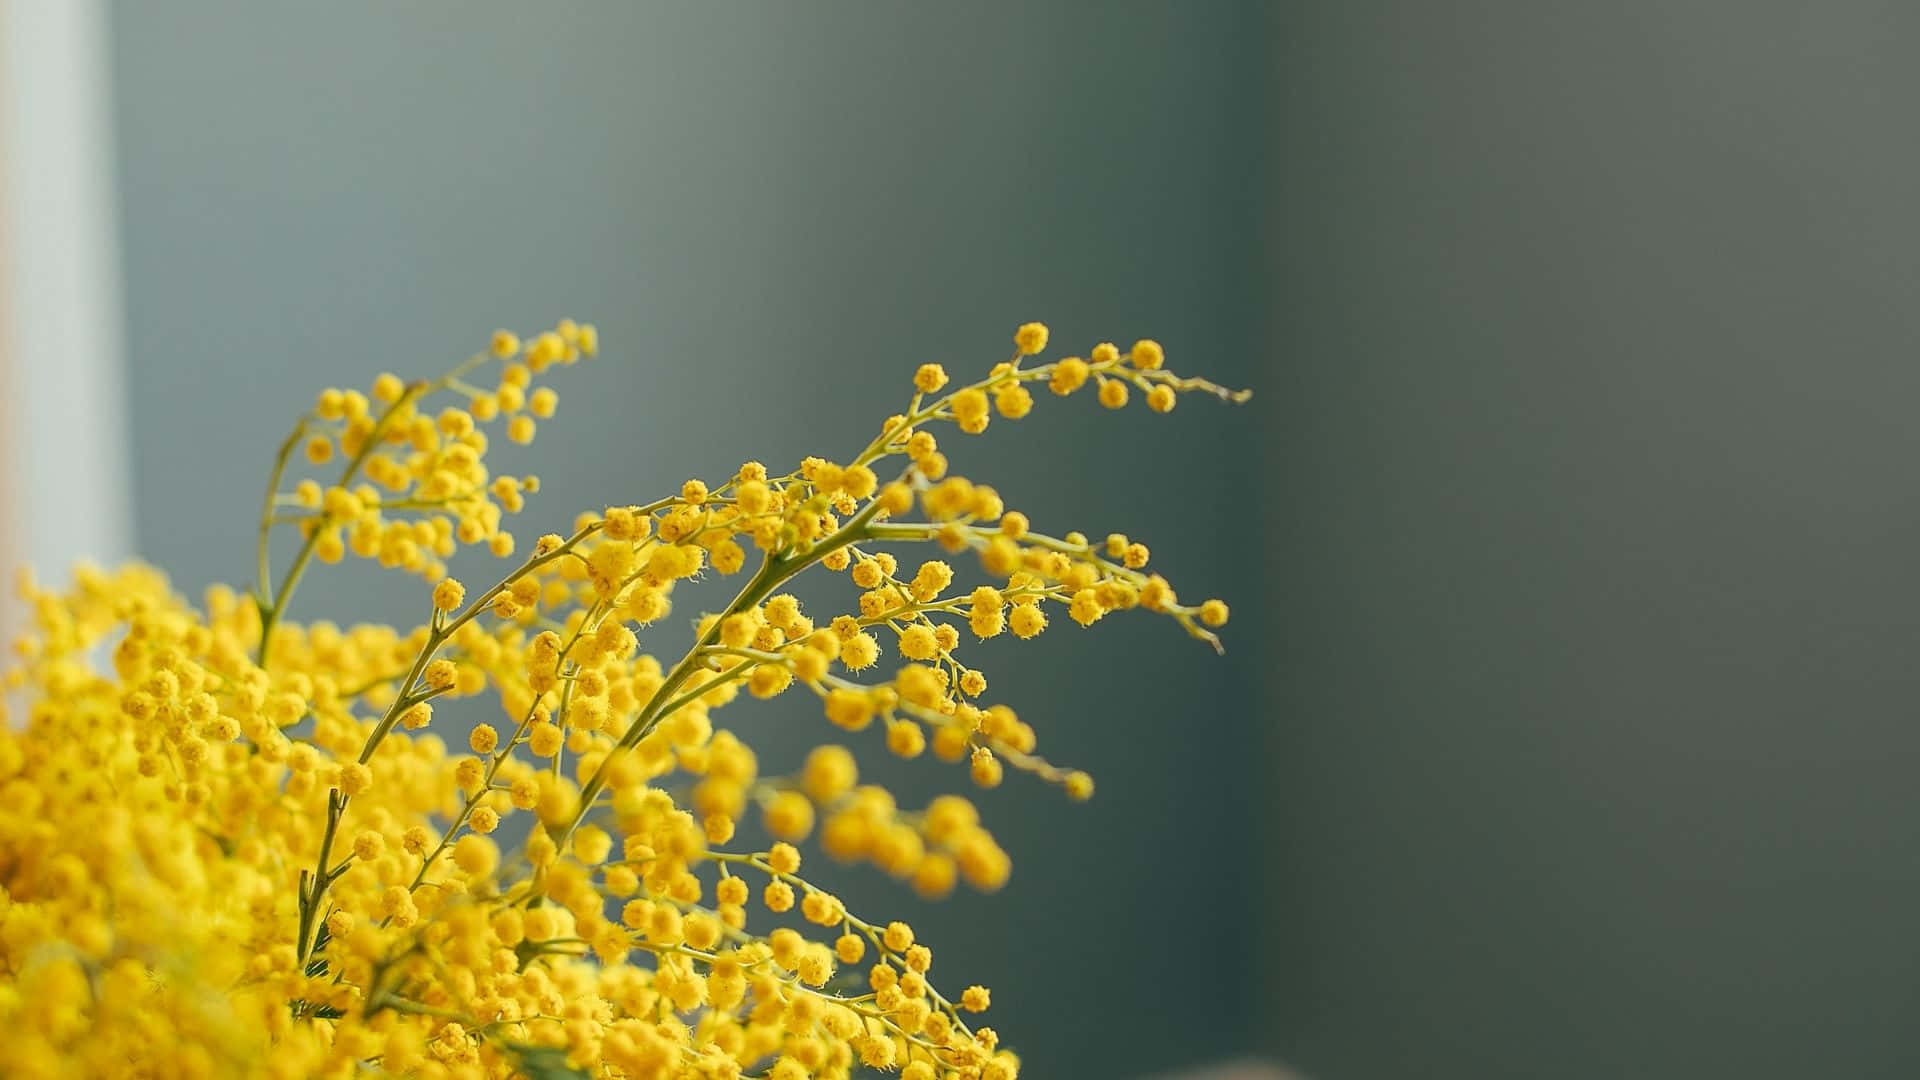 Enjoy the beauty of the sun with this yellow aesthetic background!